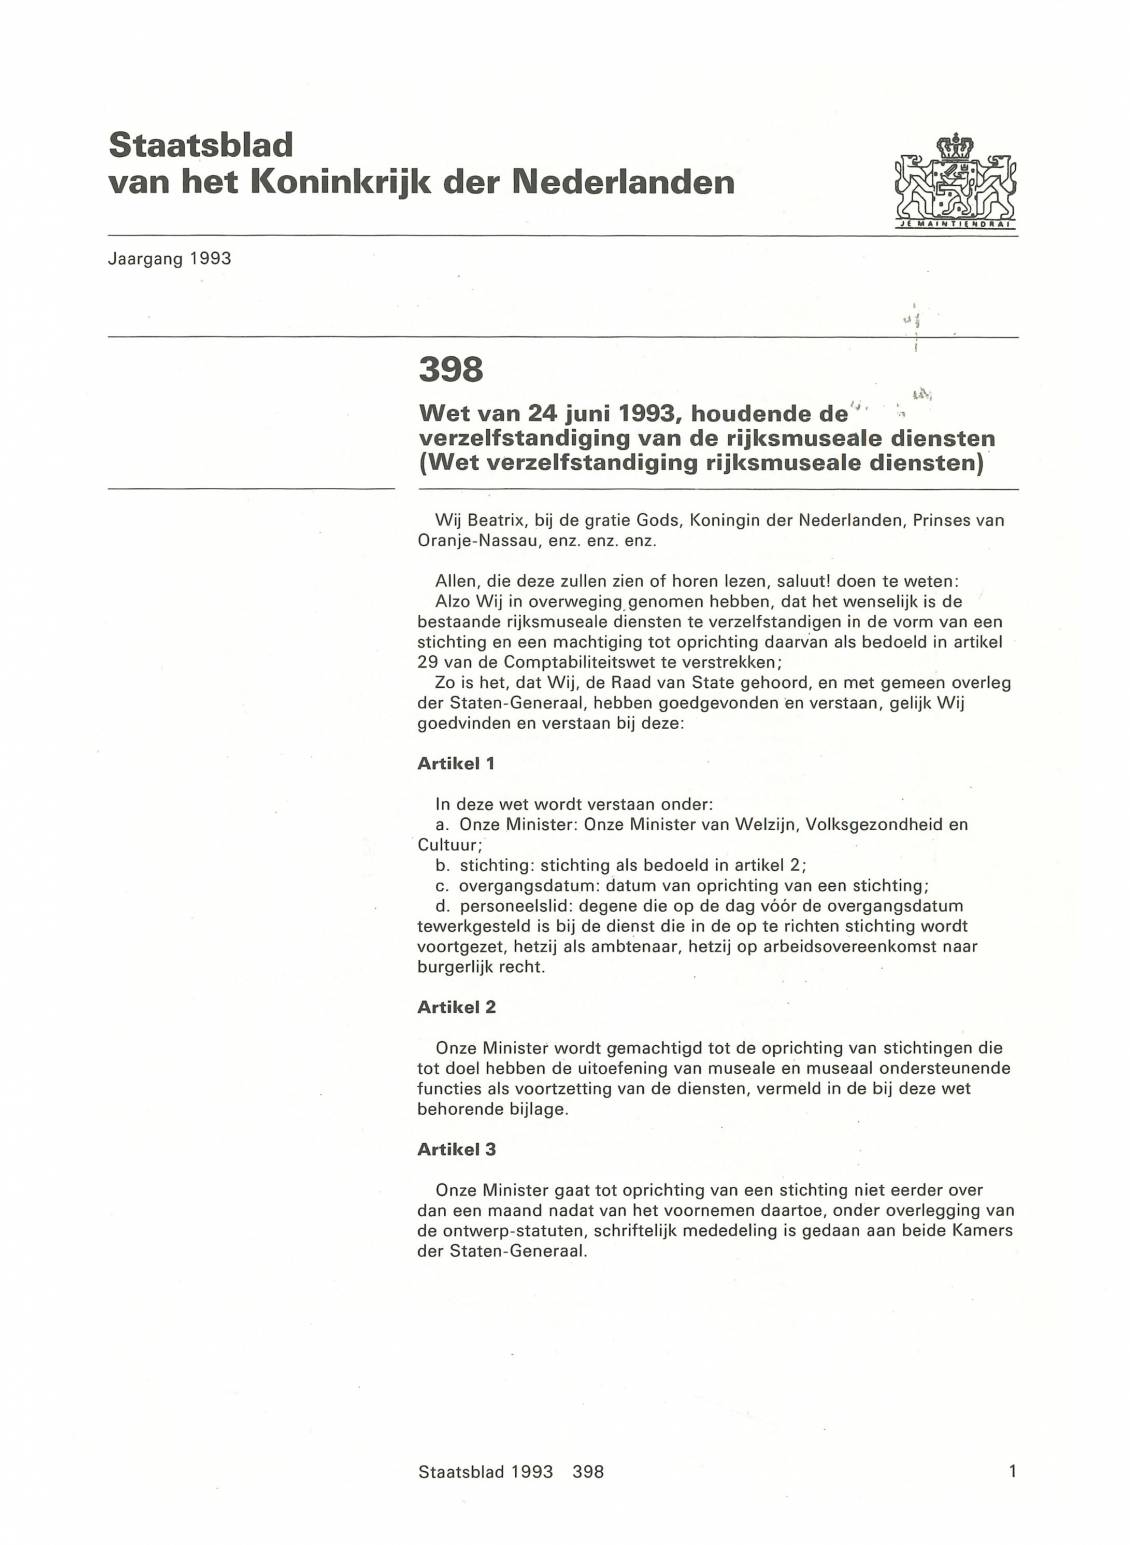 'Law on the autonomy of government museum services' published in the Dutch Official Gazette, 24 June 1993